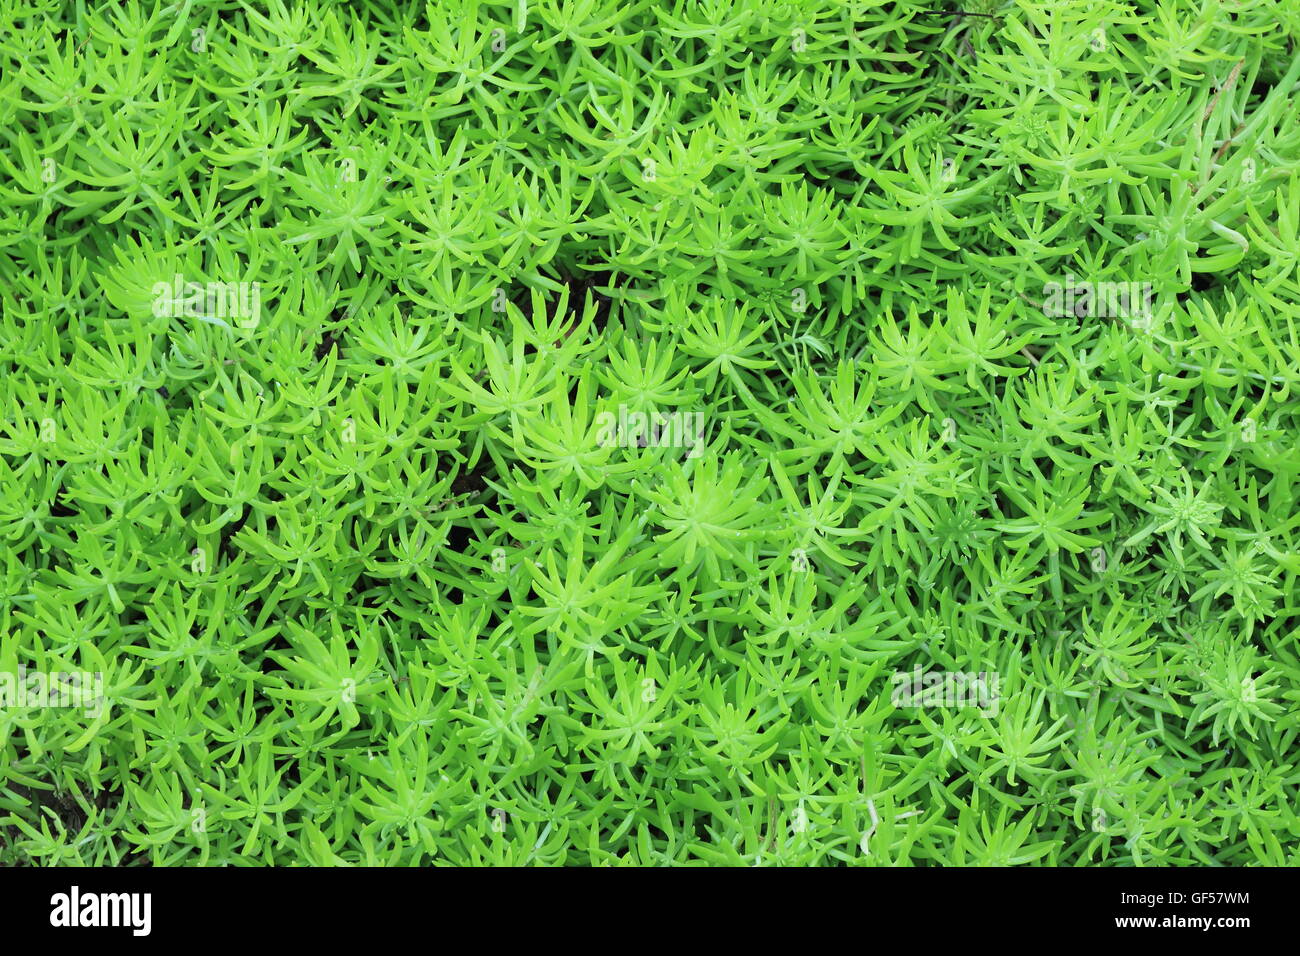 green Peat moss or Sphagnum Moss Stock Photo